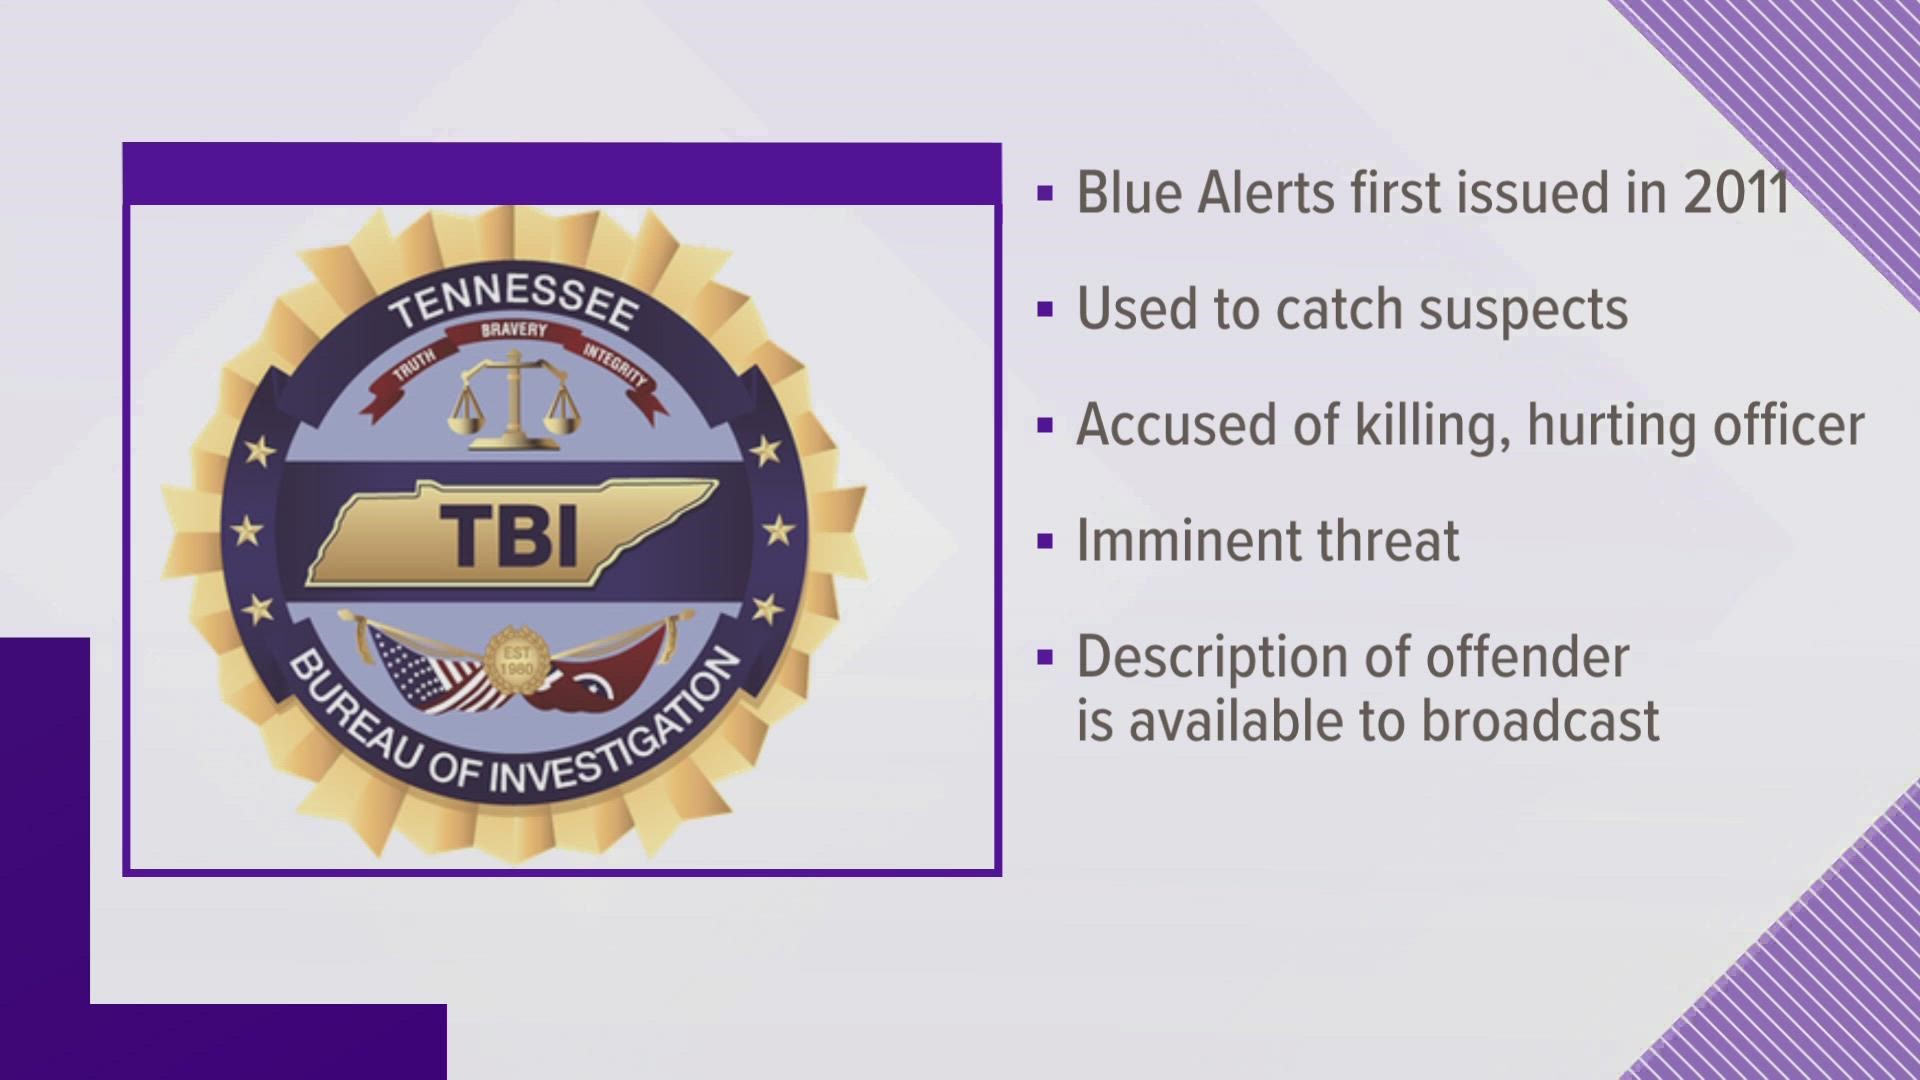 Tuesday's Blue Alerts, which were issued to find two fugitives suspected of shooting officers in Middle Tennessee, were marred with technical problems.